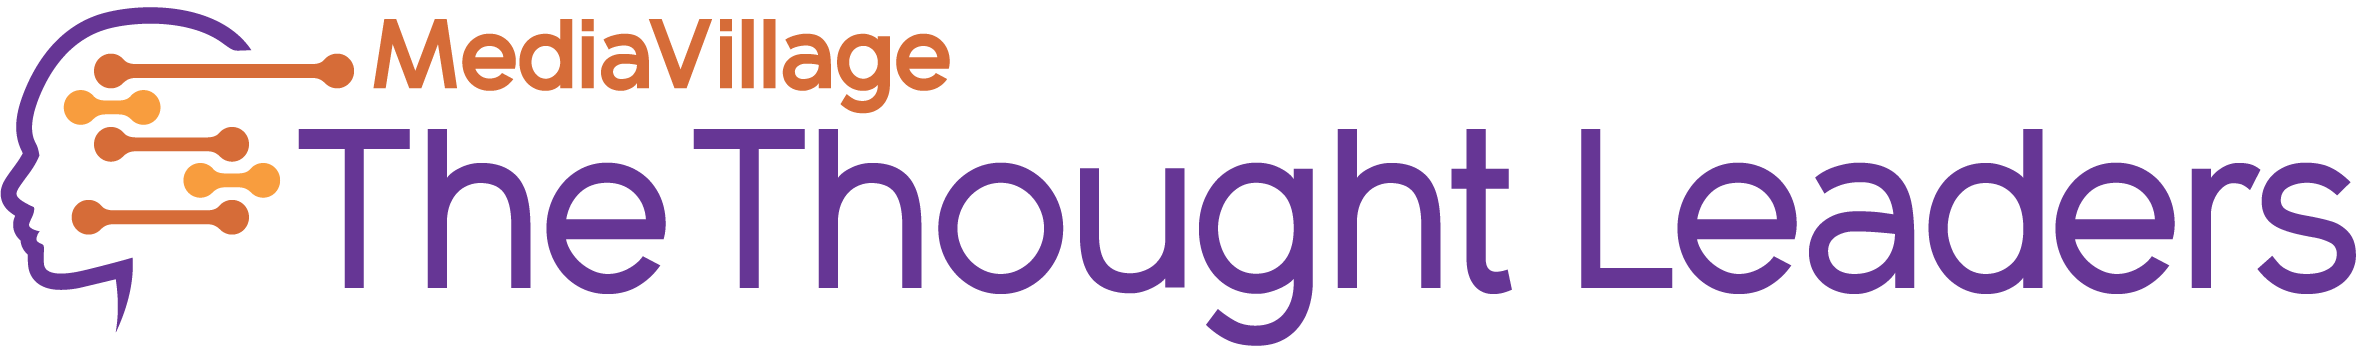 Thought Leaders logo